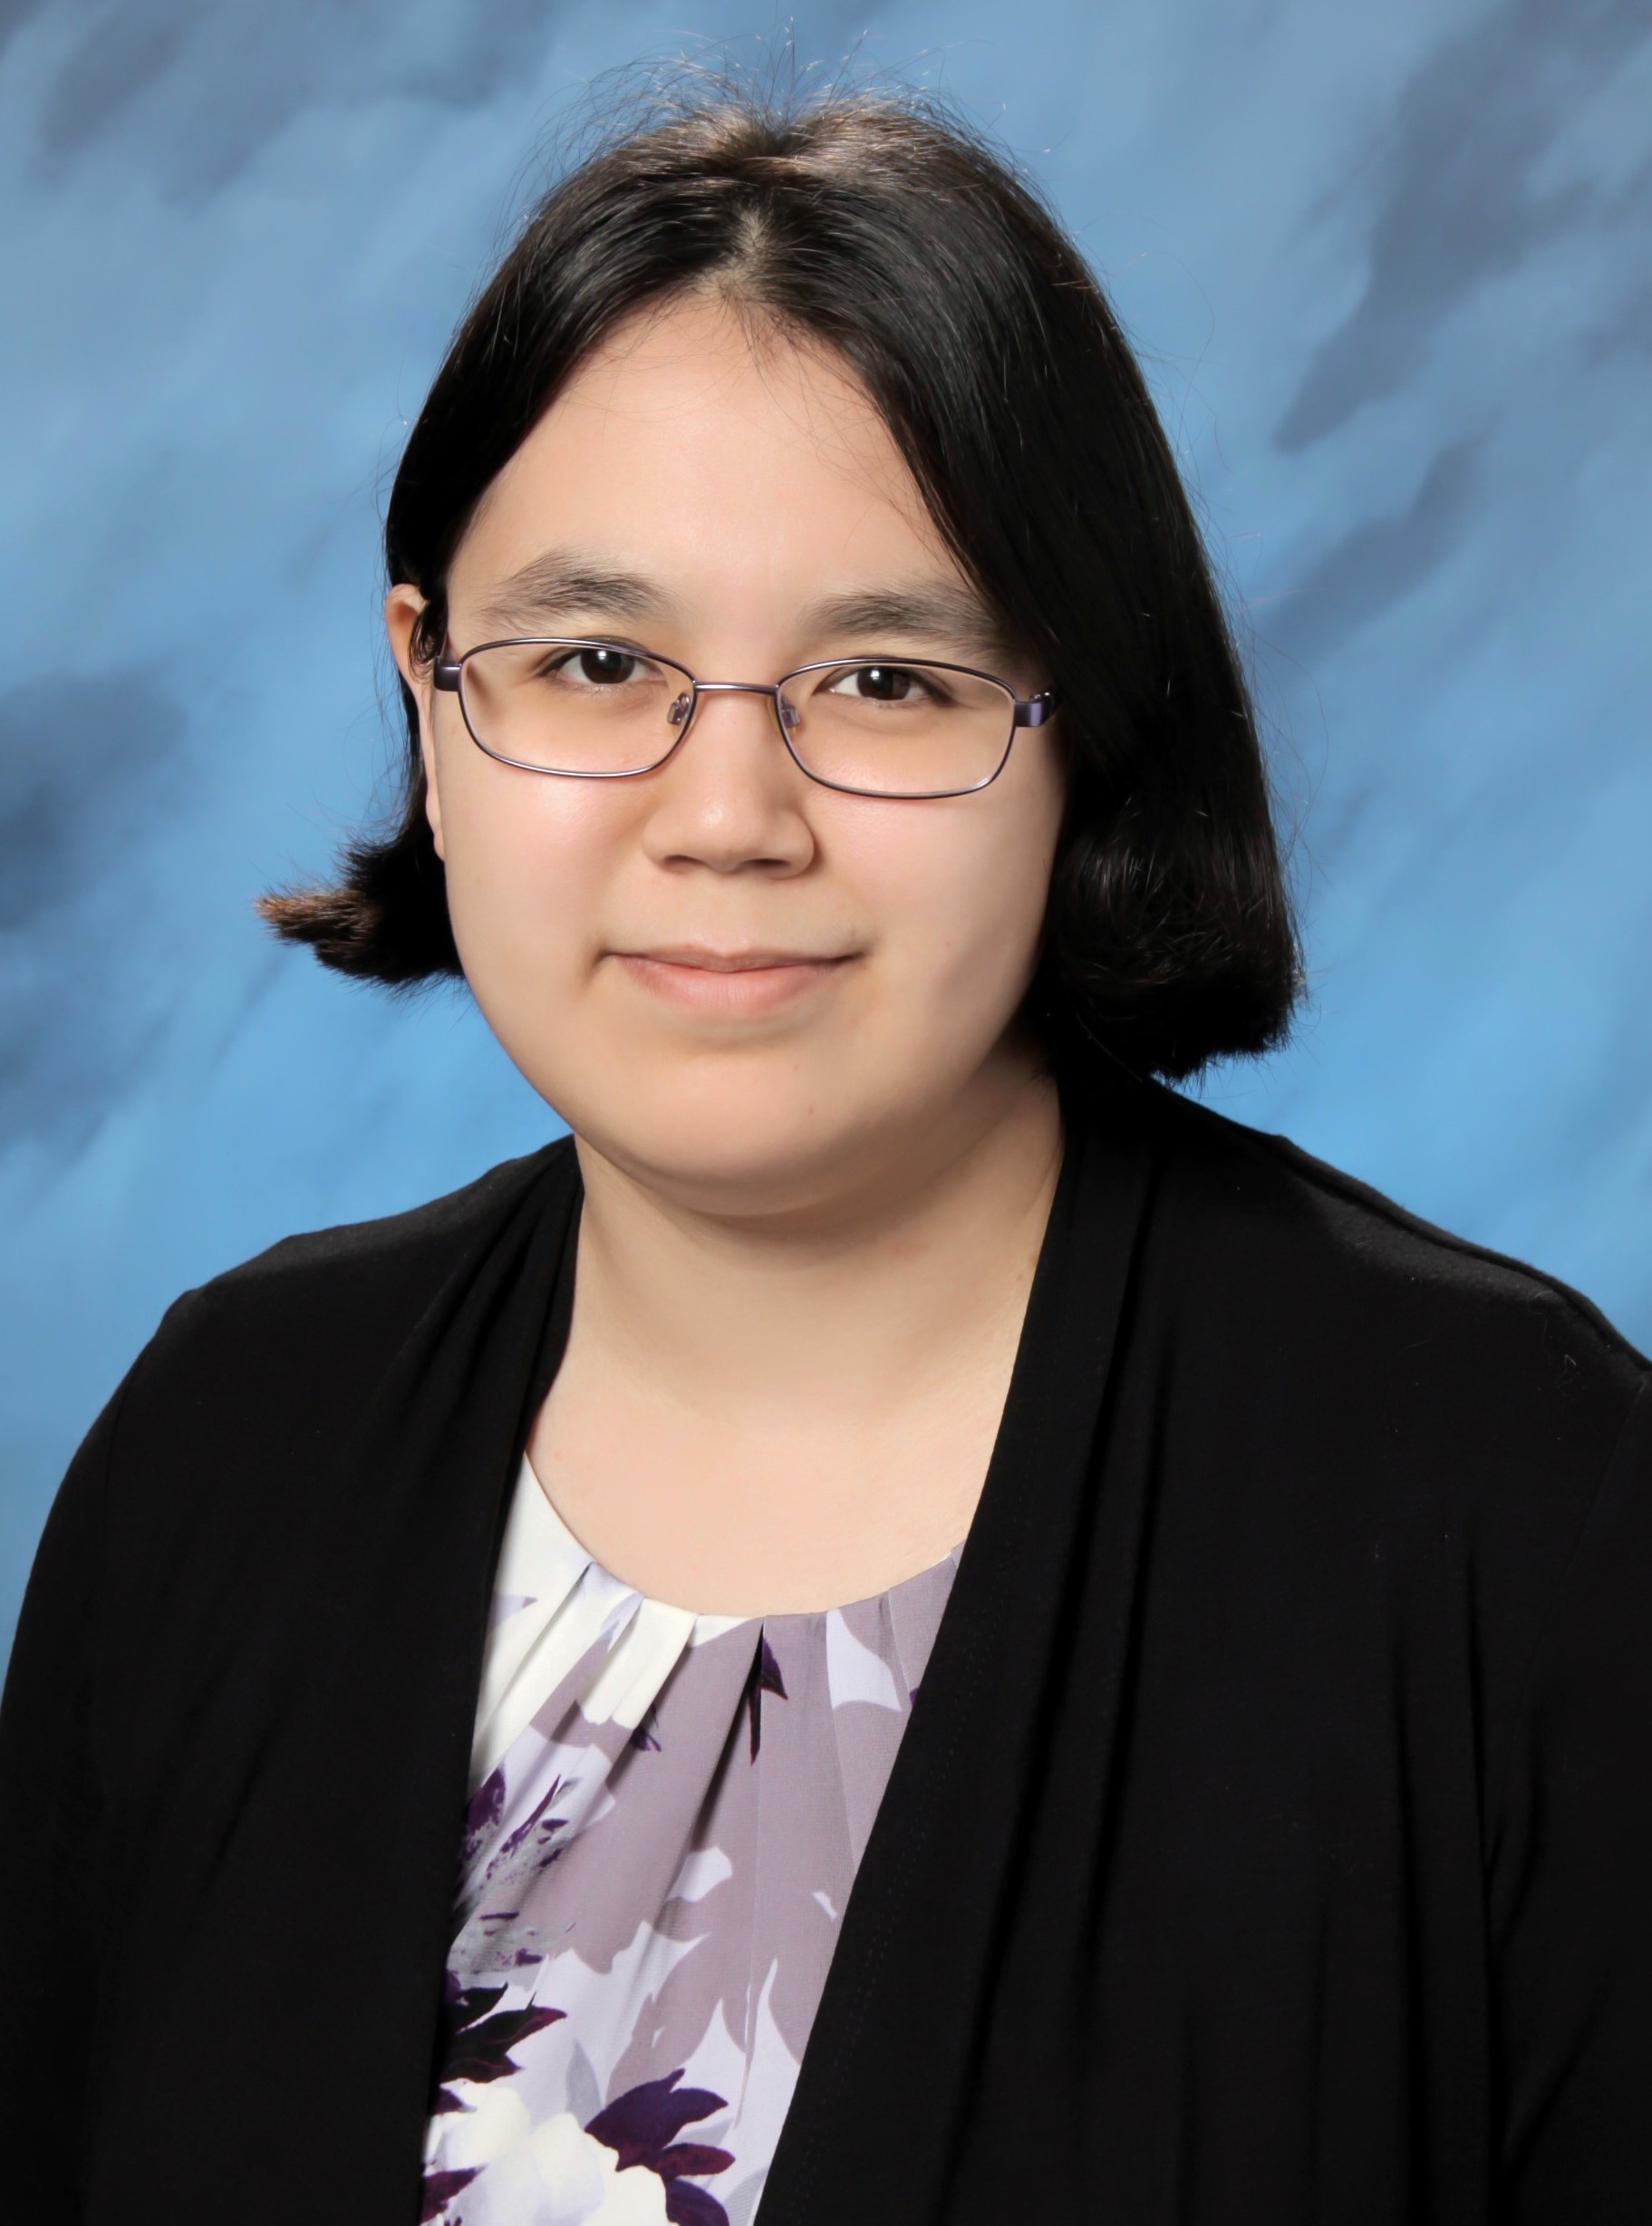 Sandy Packo, College Readiness Program Administrator at the American Indian College Fund, was named an inaugural Education Fellow for the First Peoples Fund’s We the Peoples Before 25th Anniversary Celebration of Native Cultural Expression and Sovereignty event.